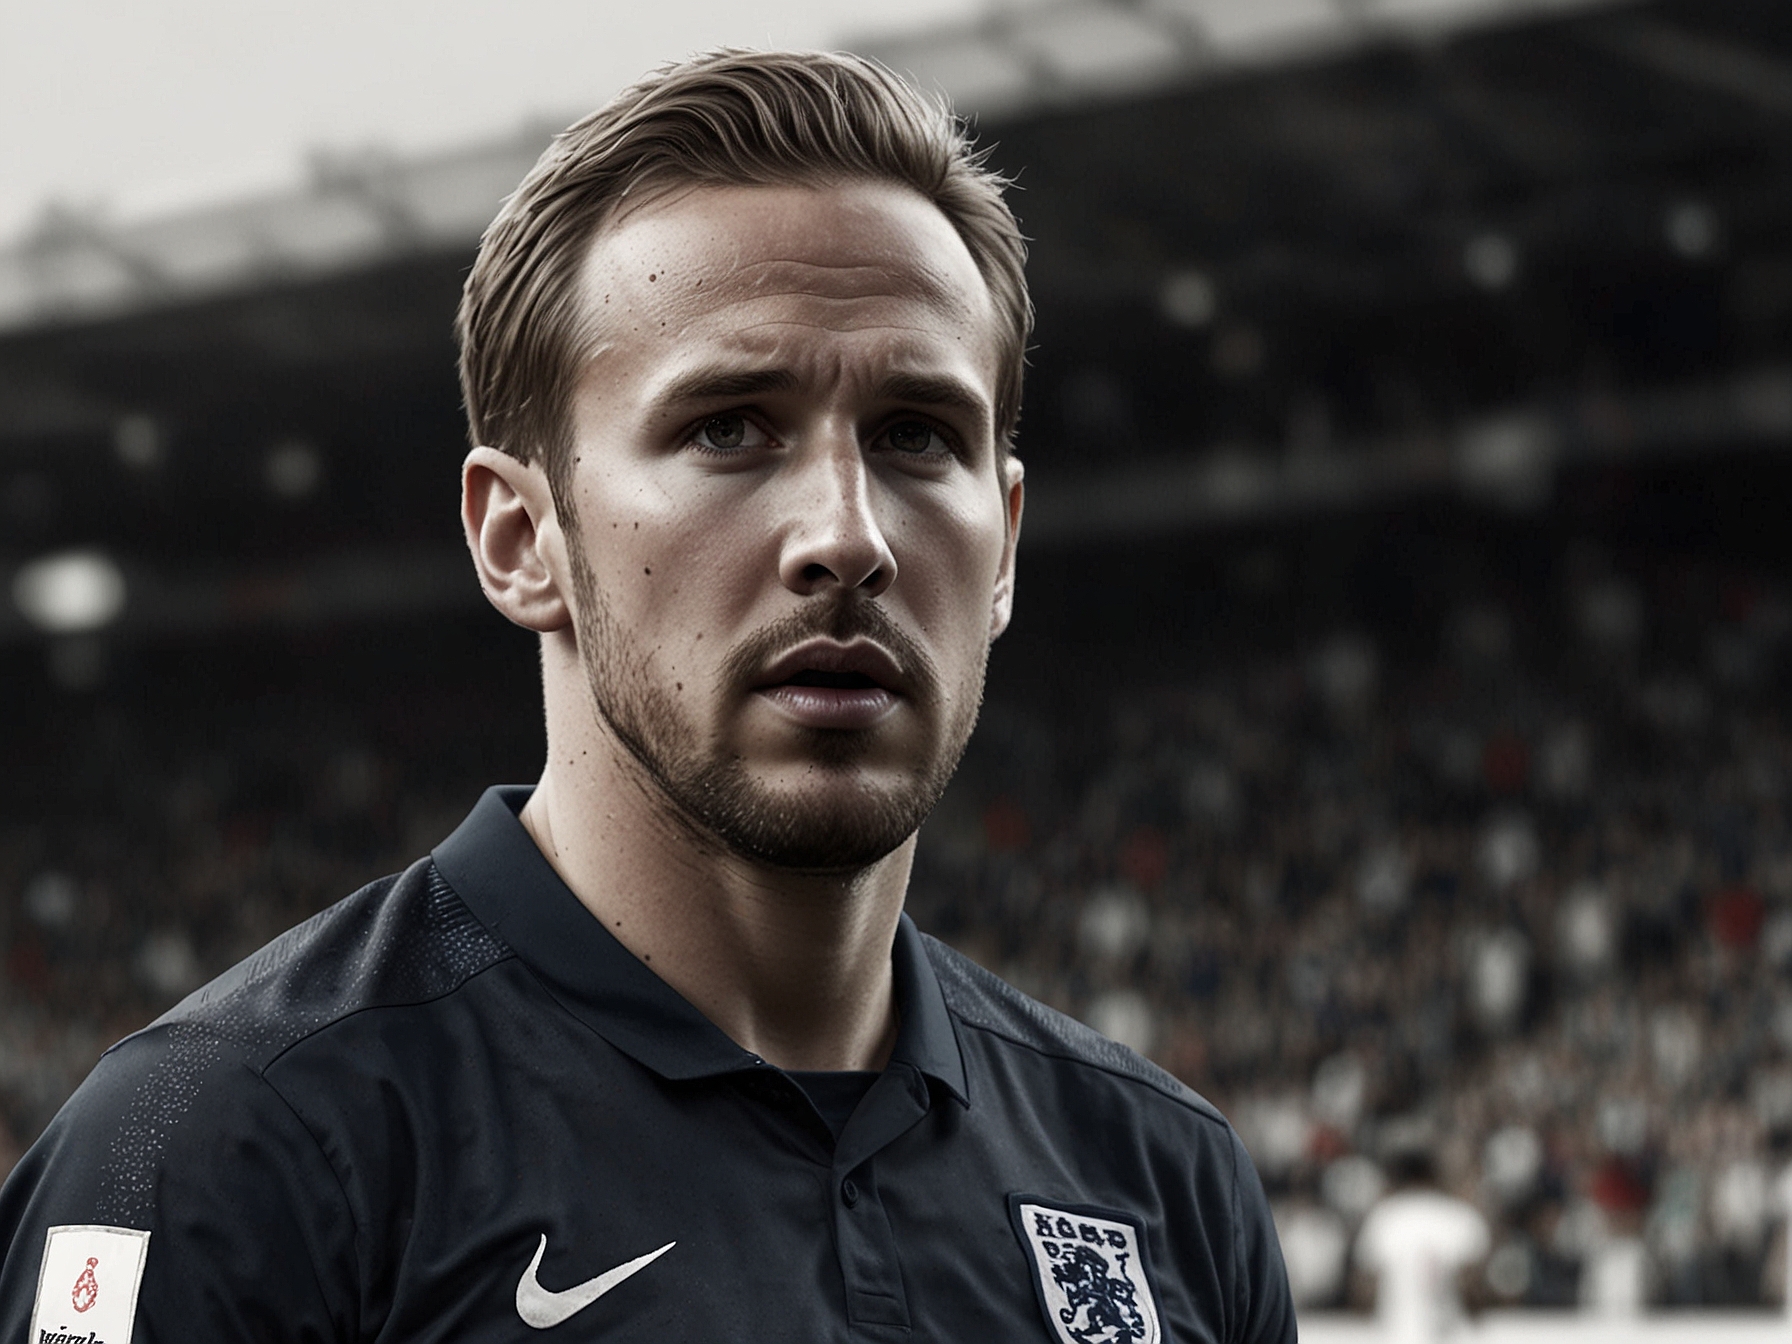 An image of Harry Kane on the field during an England match, showing determination and focus. His performance and role as captain are under discussion amidst rising scrutiny and criticism.